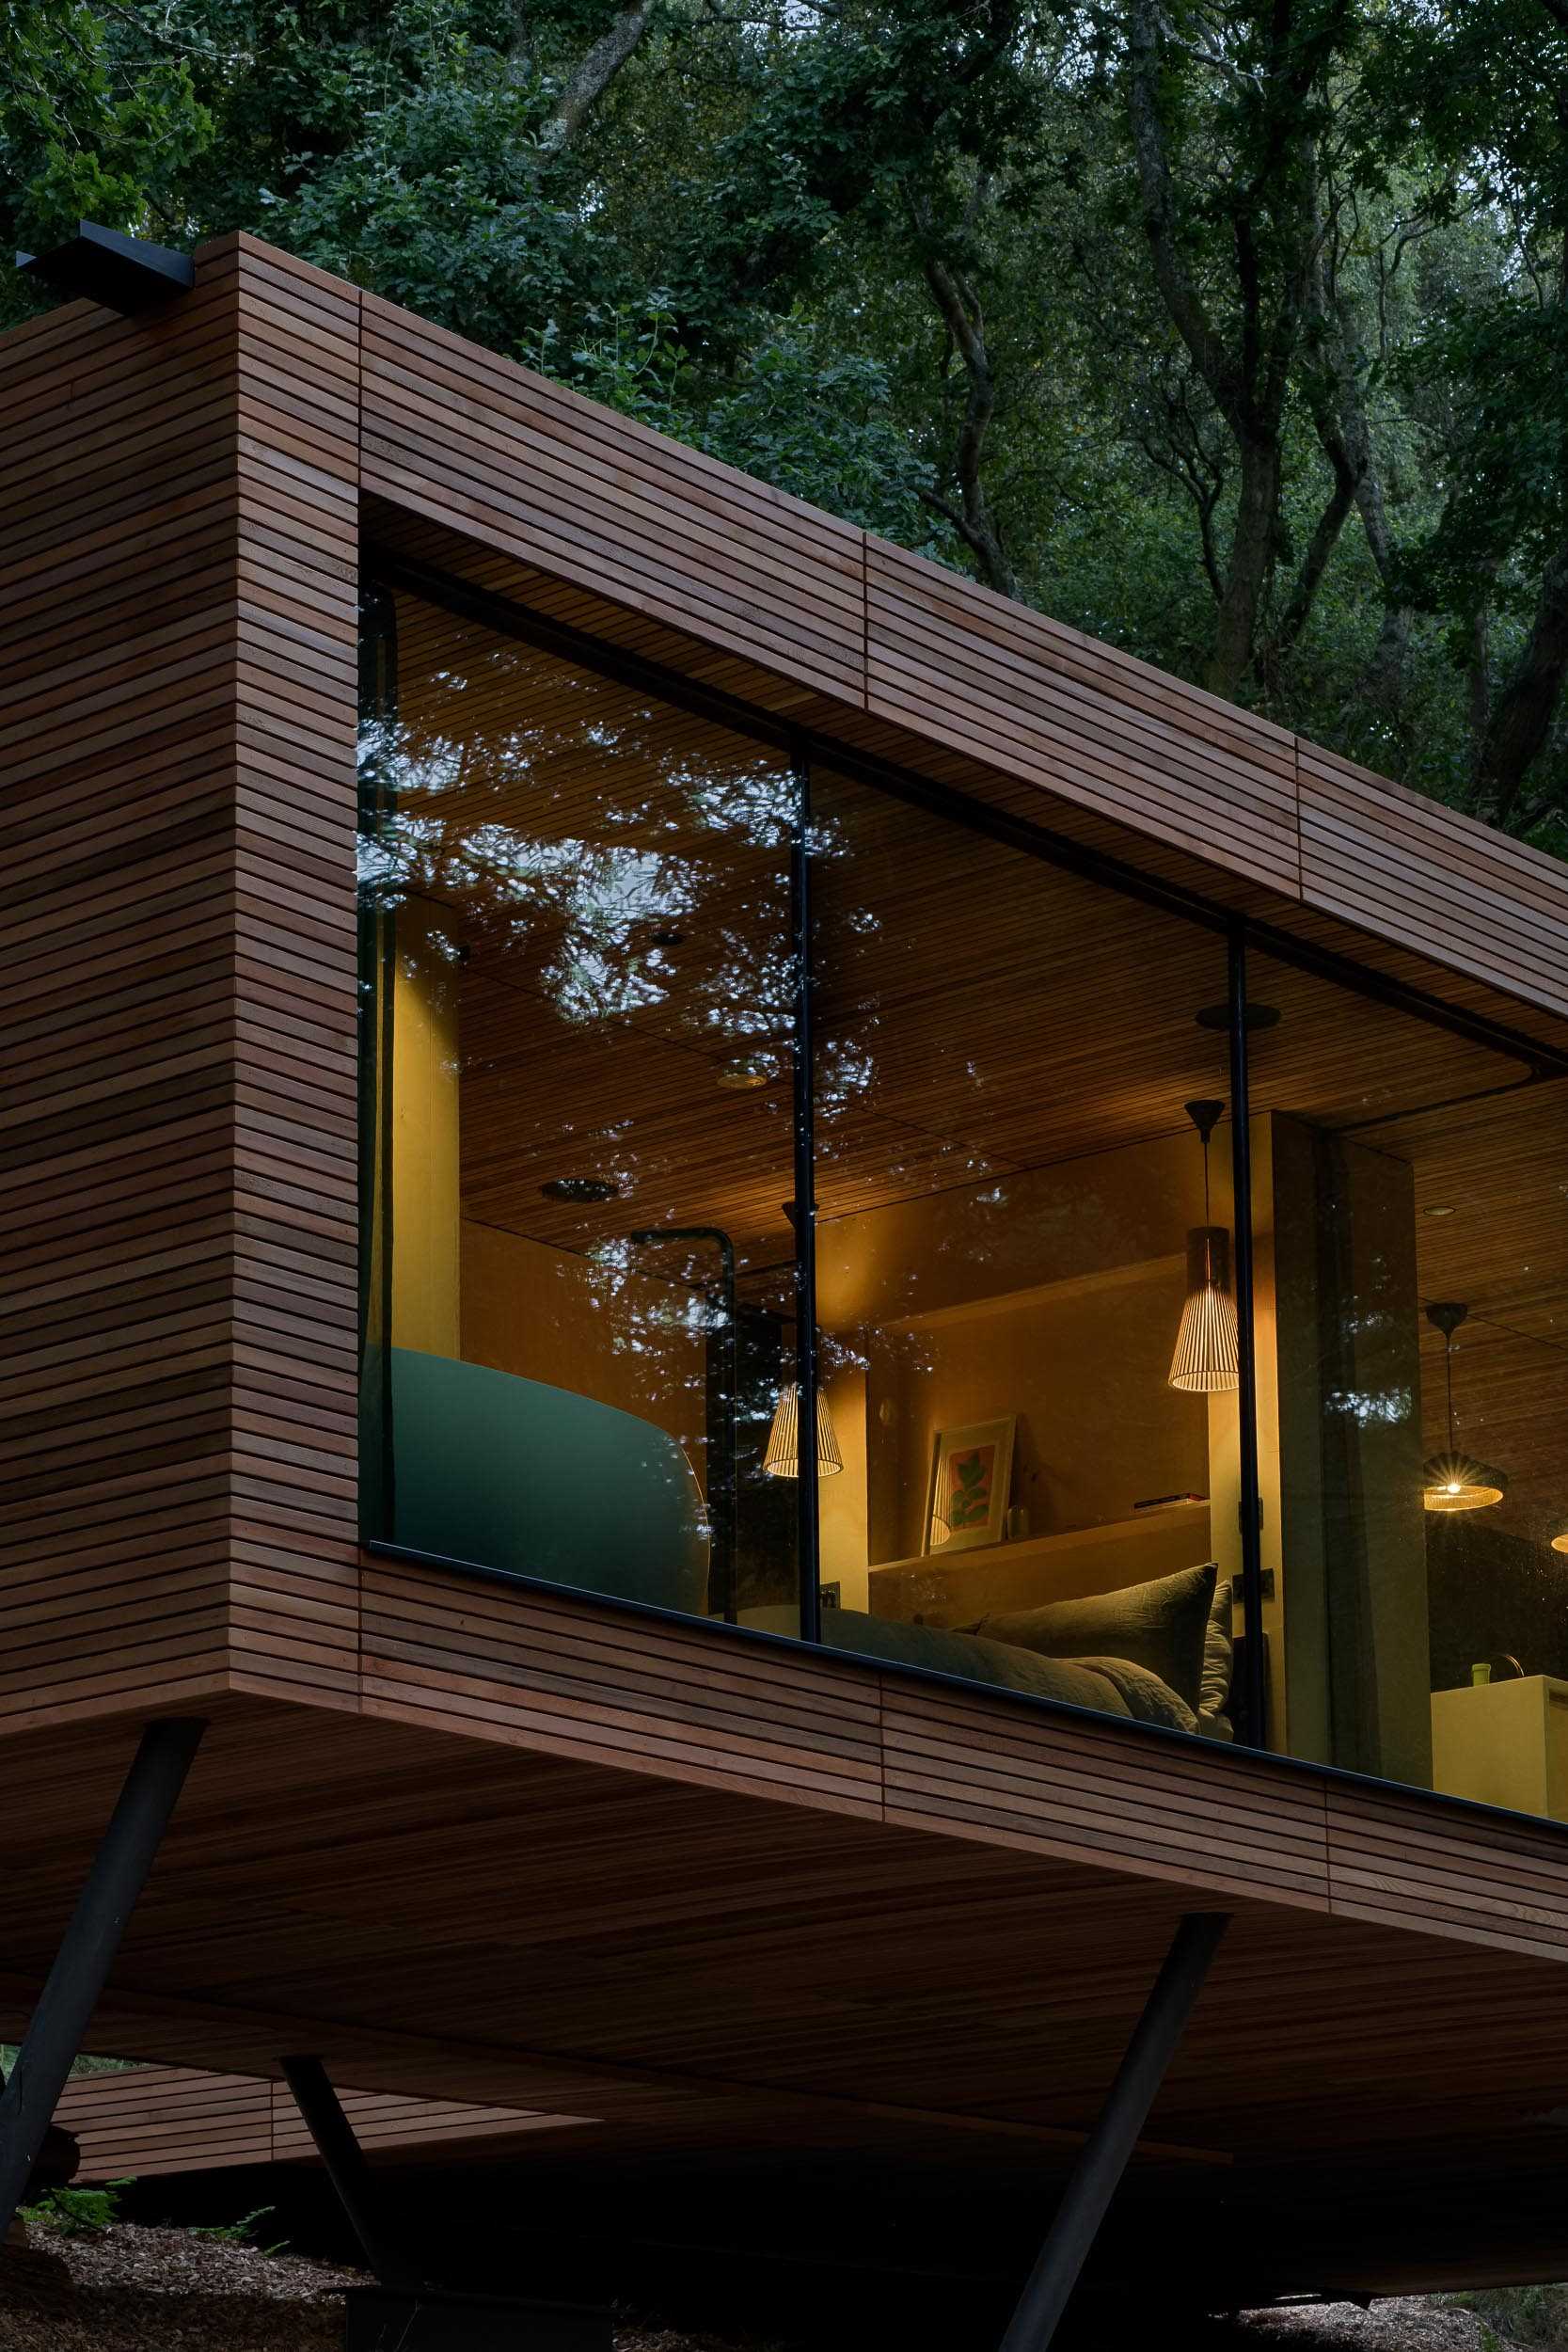 A wood clad home nestled between the trees.